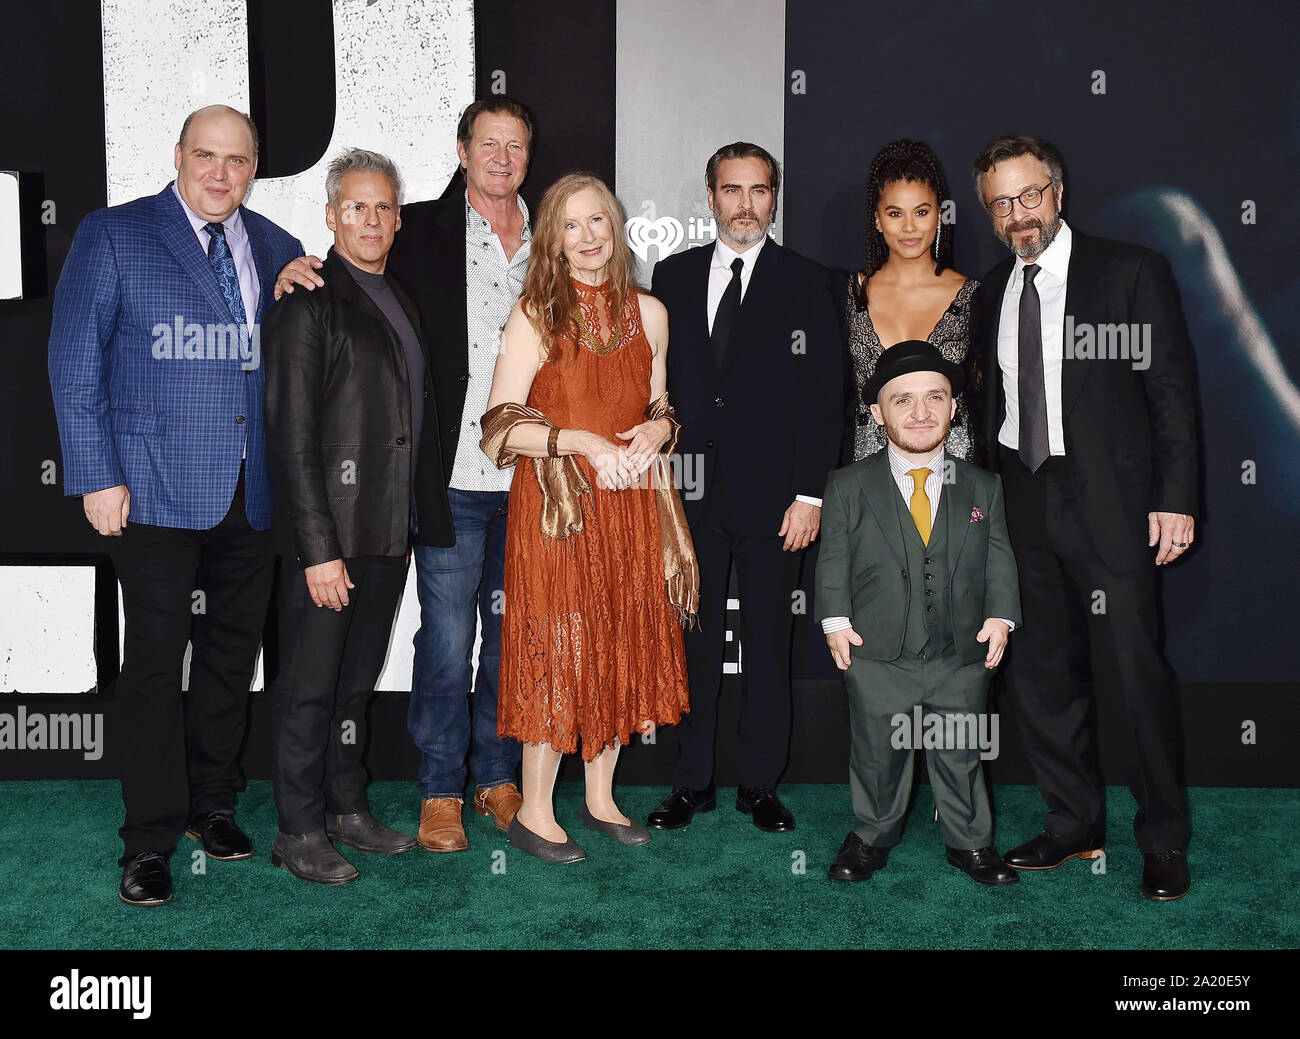 HOLLYWOOD, CA - SEPTEMBER 28: (L-R) Glenn Fleshler, Josh Pais, Brett Cullen, Frances Conroy, Joaquin Phoenix, Zazie Beetz, Leigh Gill and Marc Maron attend for the premiere of Warner Bros Pictures 'Joker' held at TCL Chinese Theatre IMAX on September 28, 2019 in Hollywood, California. Stock Photo